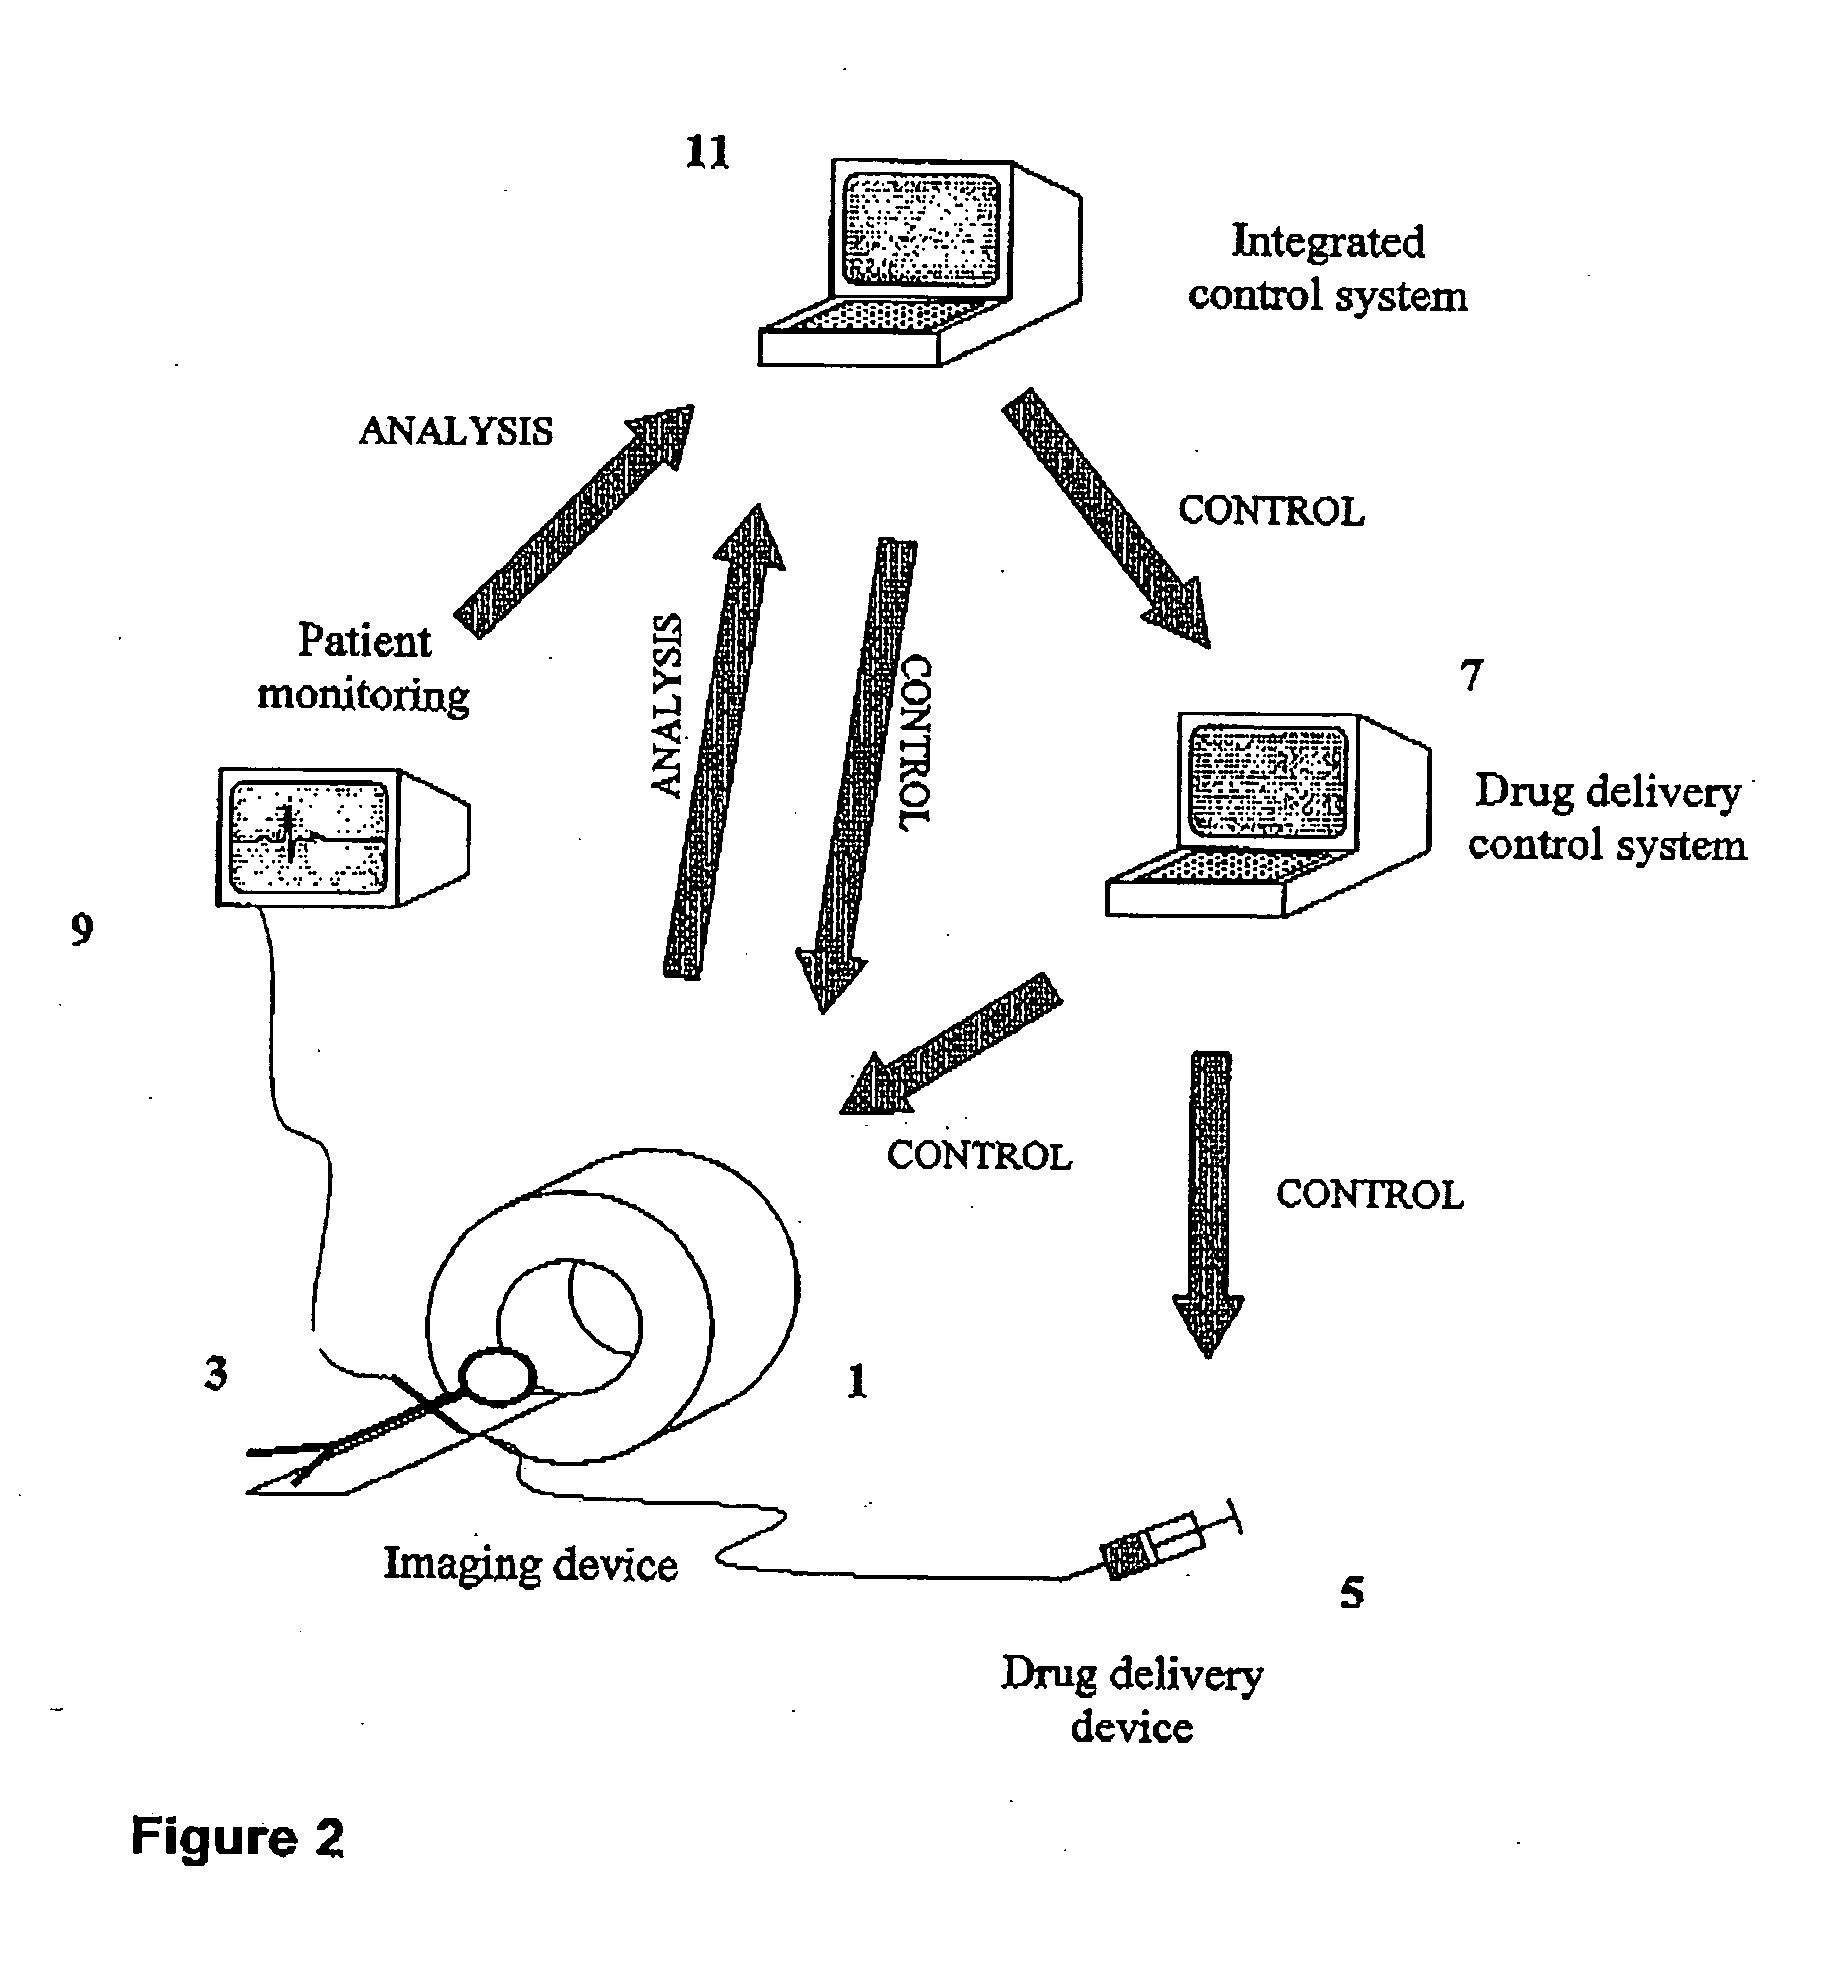 System for controlling medical data acquisition processes